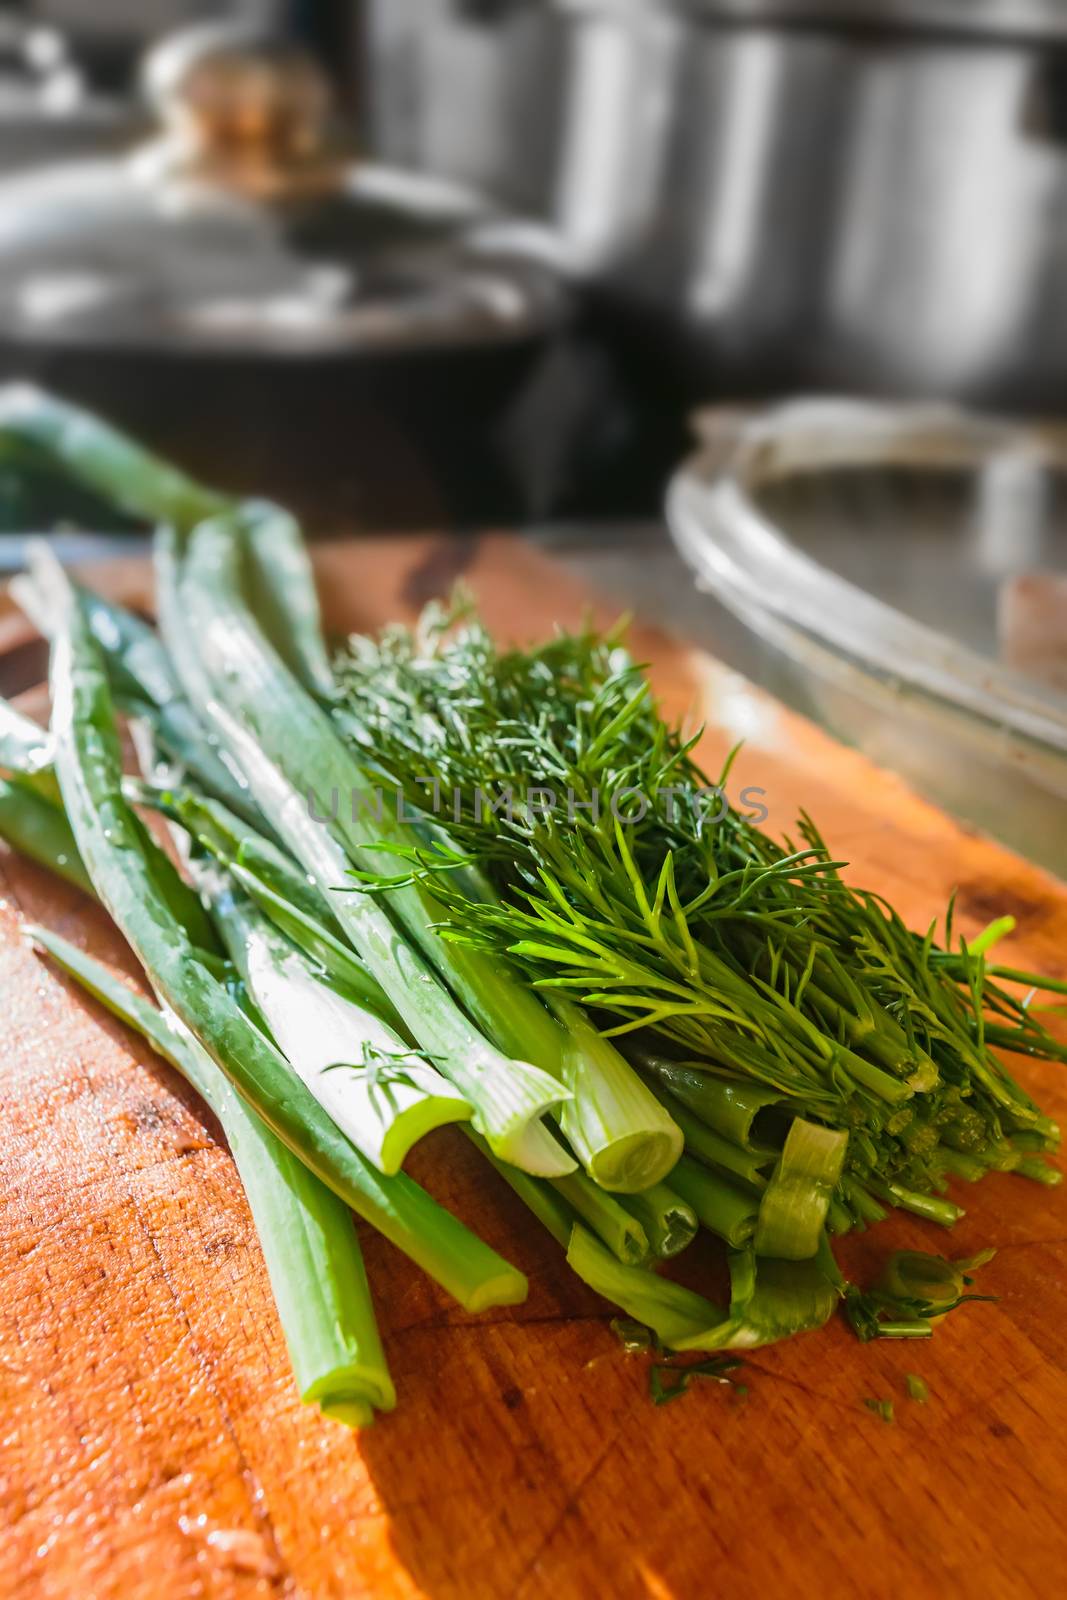 Chopped green onions and dill on a wooden board